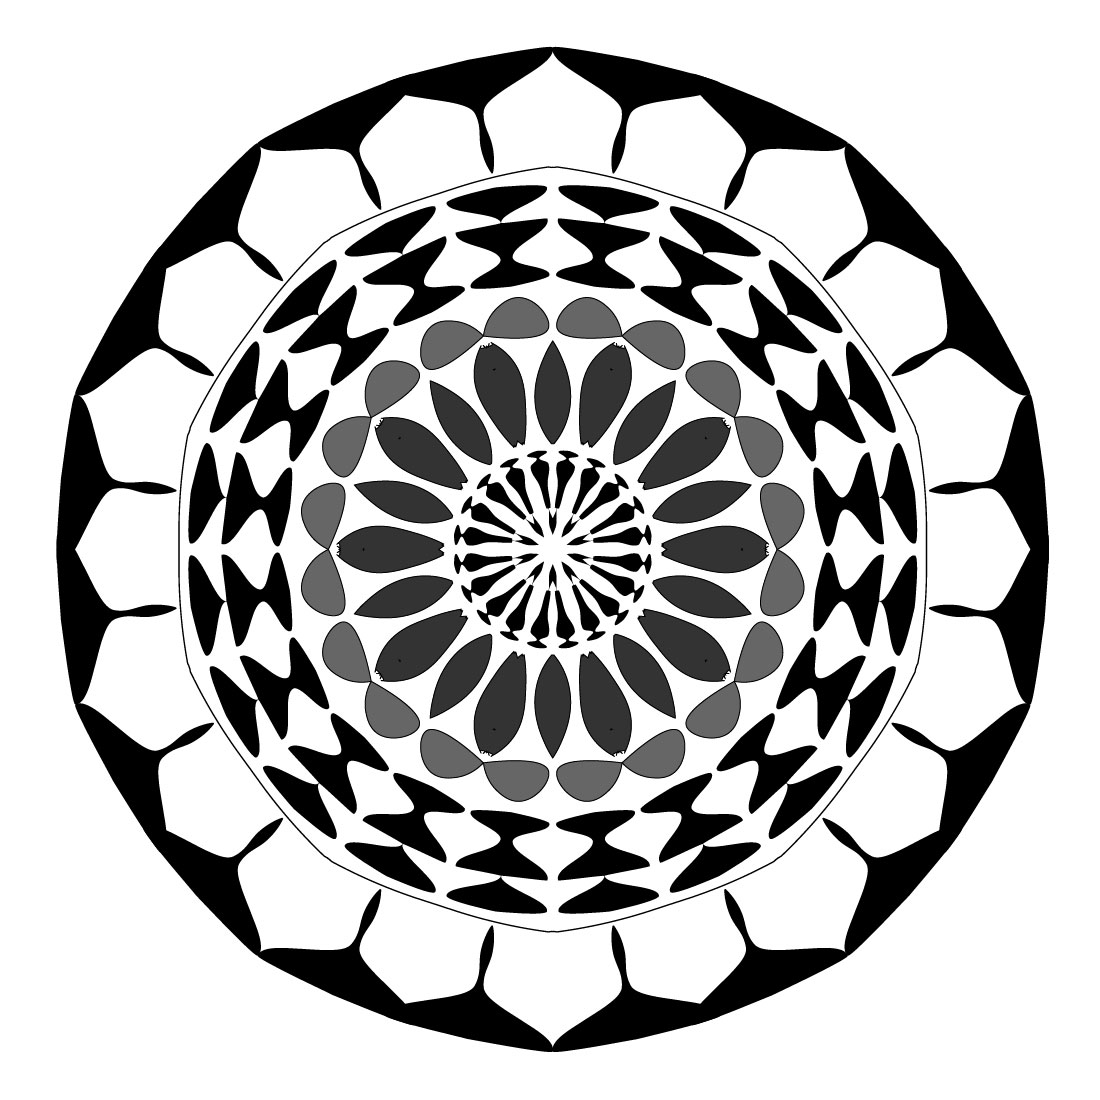 Mandala-Art-with-lotus-flower-in-black-and-white cover image.